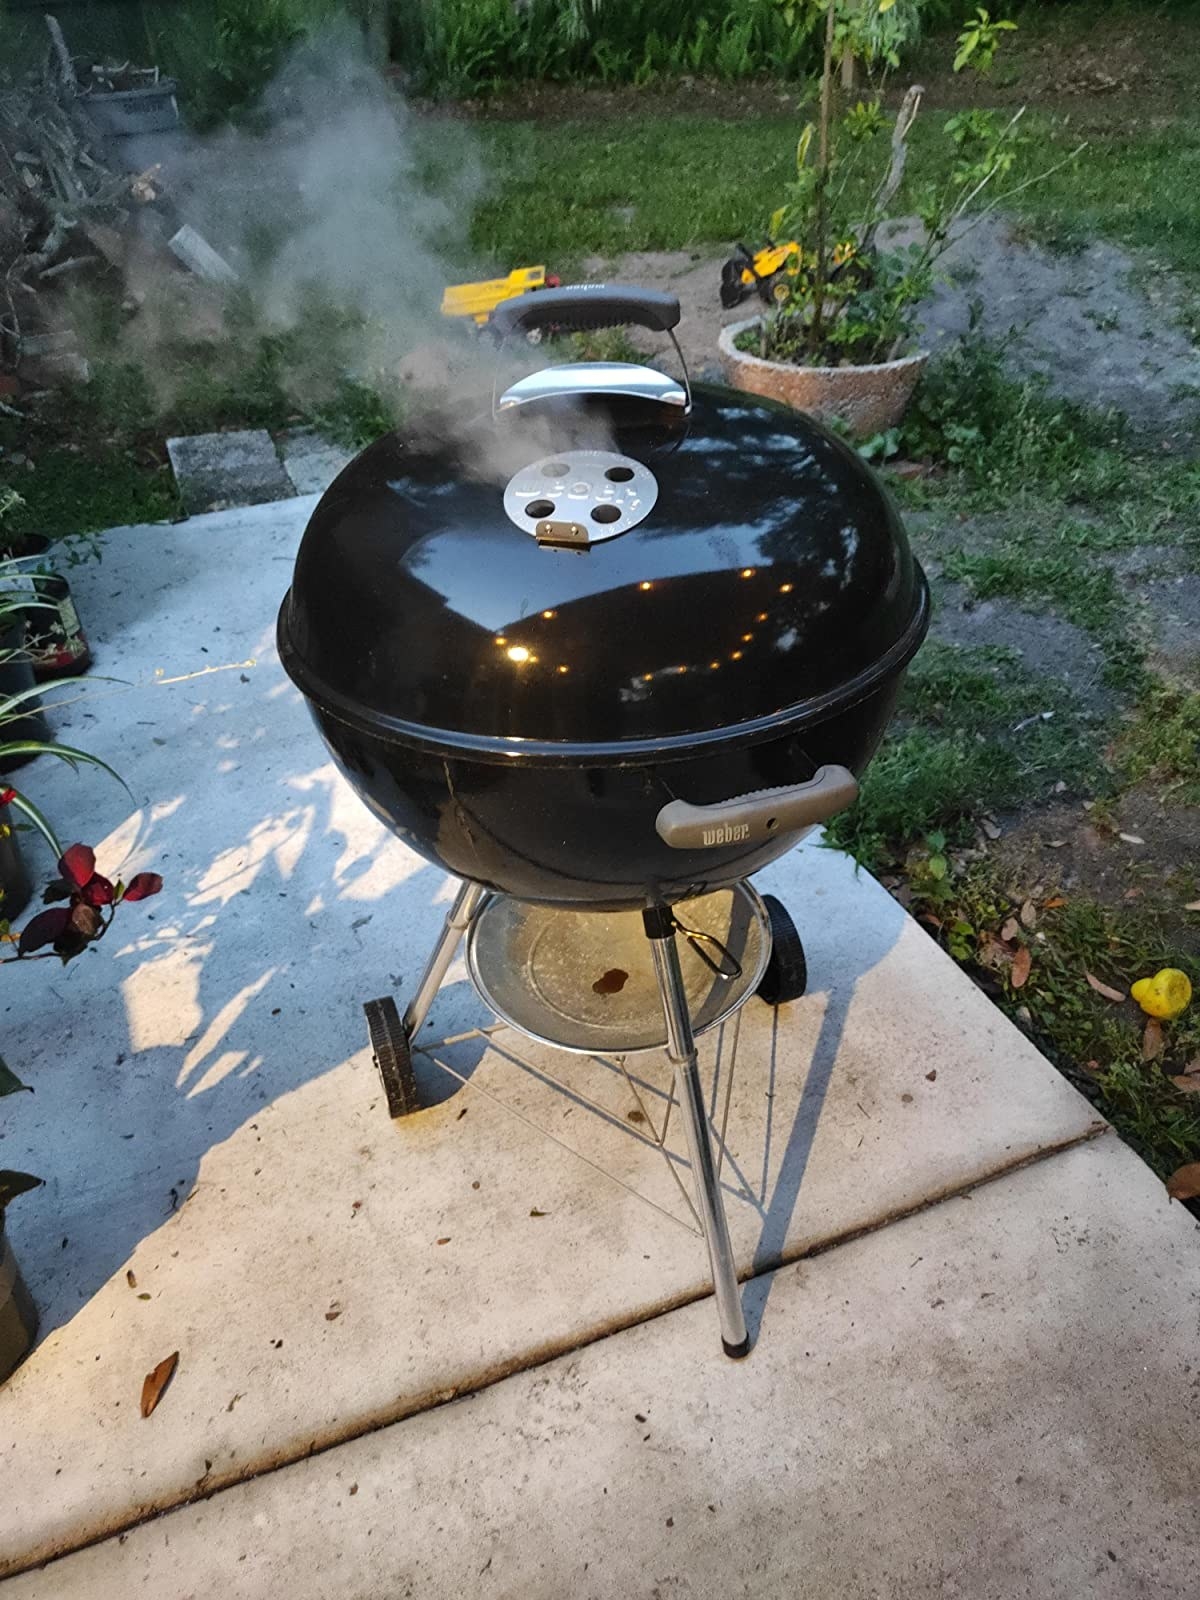 A grill being used in the backyard